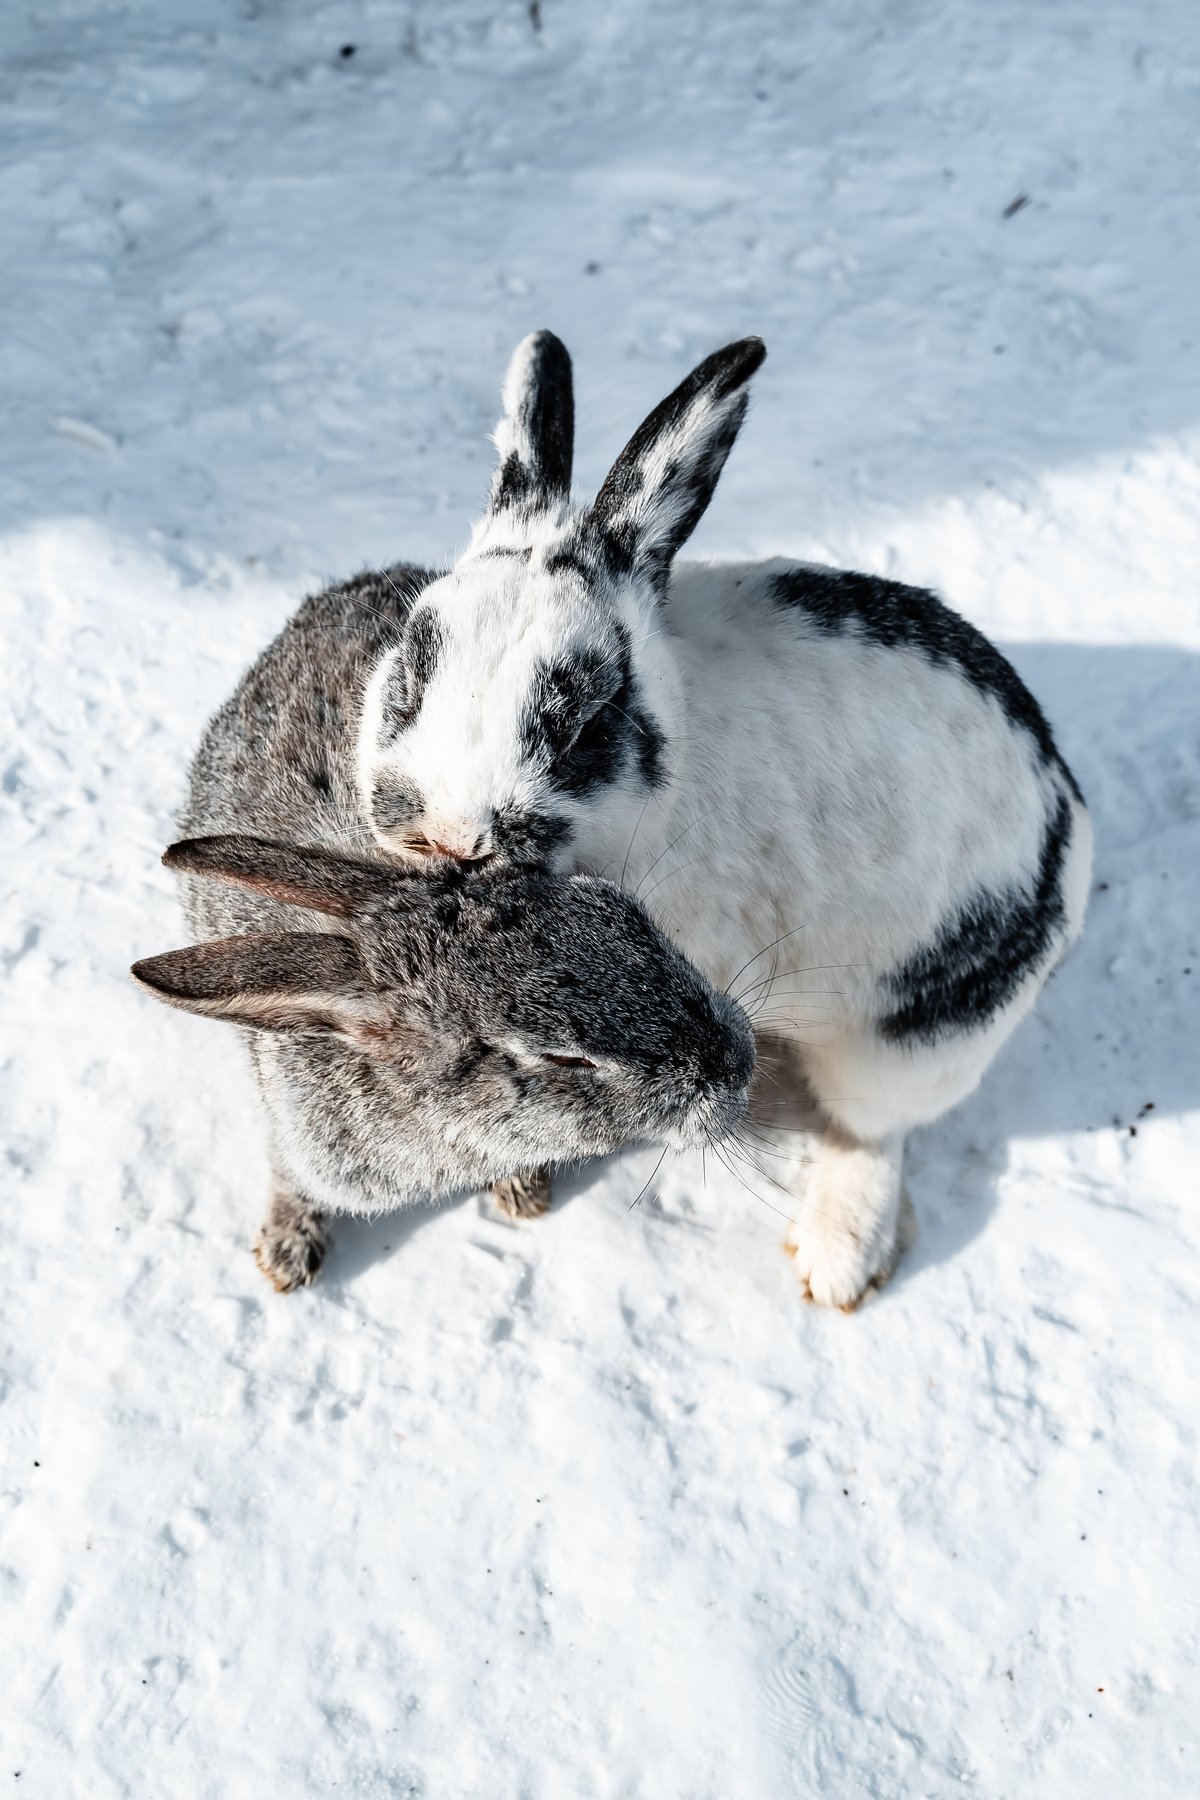 wildlife; water; natural; safari; park; sea; outdoor; wilderness; river; young; africa; snow; black; national; migration; ocean; big; buffalo; asian; tan; isolated on white; cut-out; whiskers; animal themes; bunny rabbit; sitting; beige; portrait; brown; , Dmitry Leonov